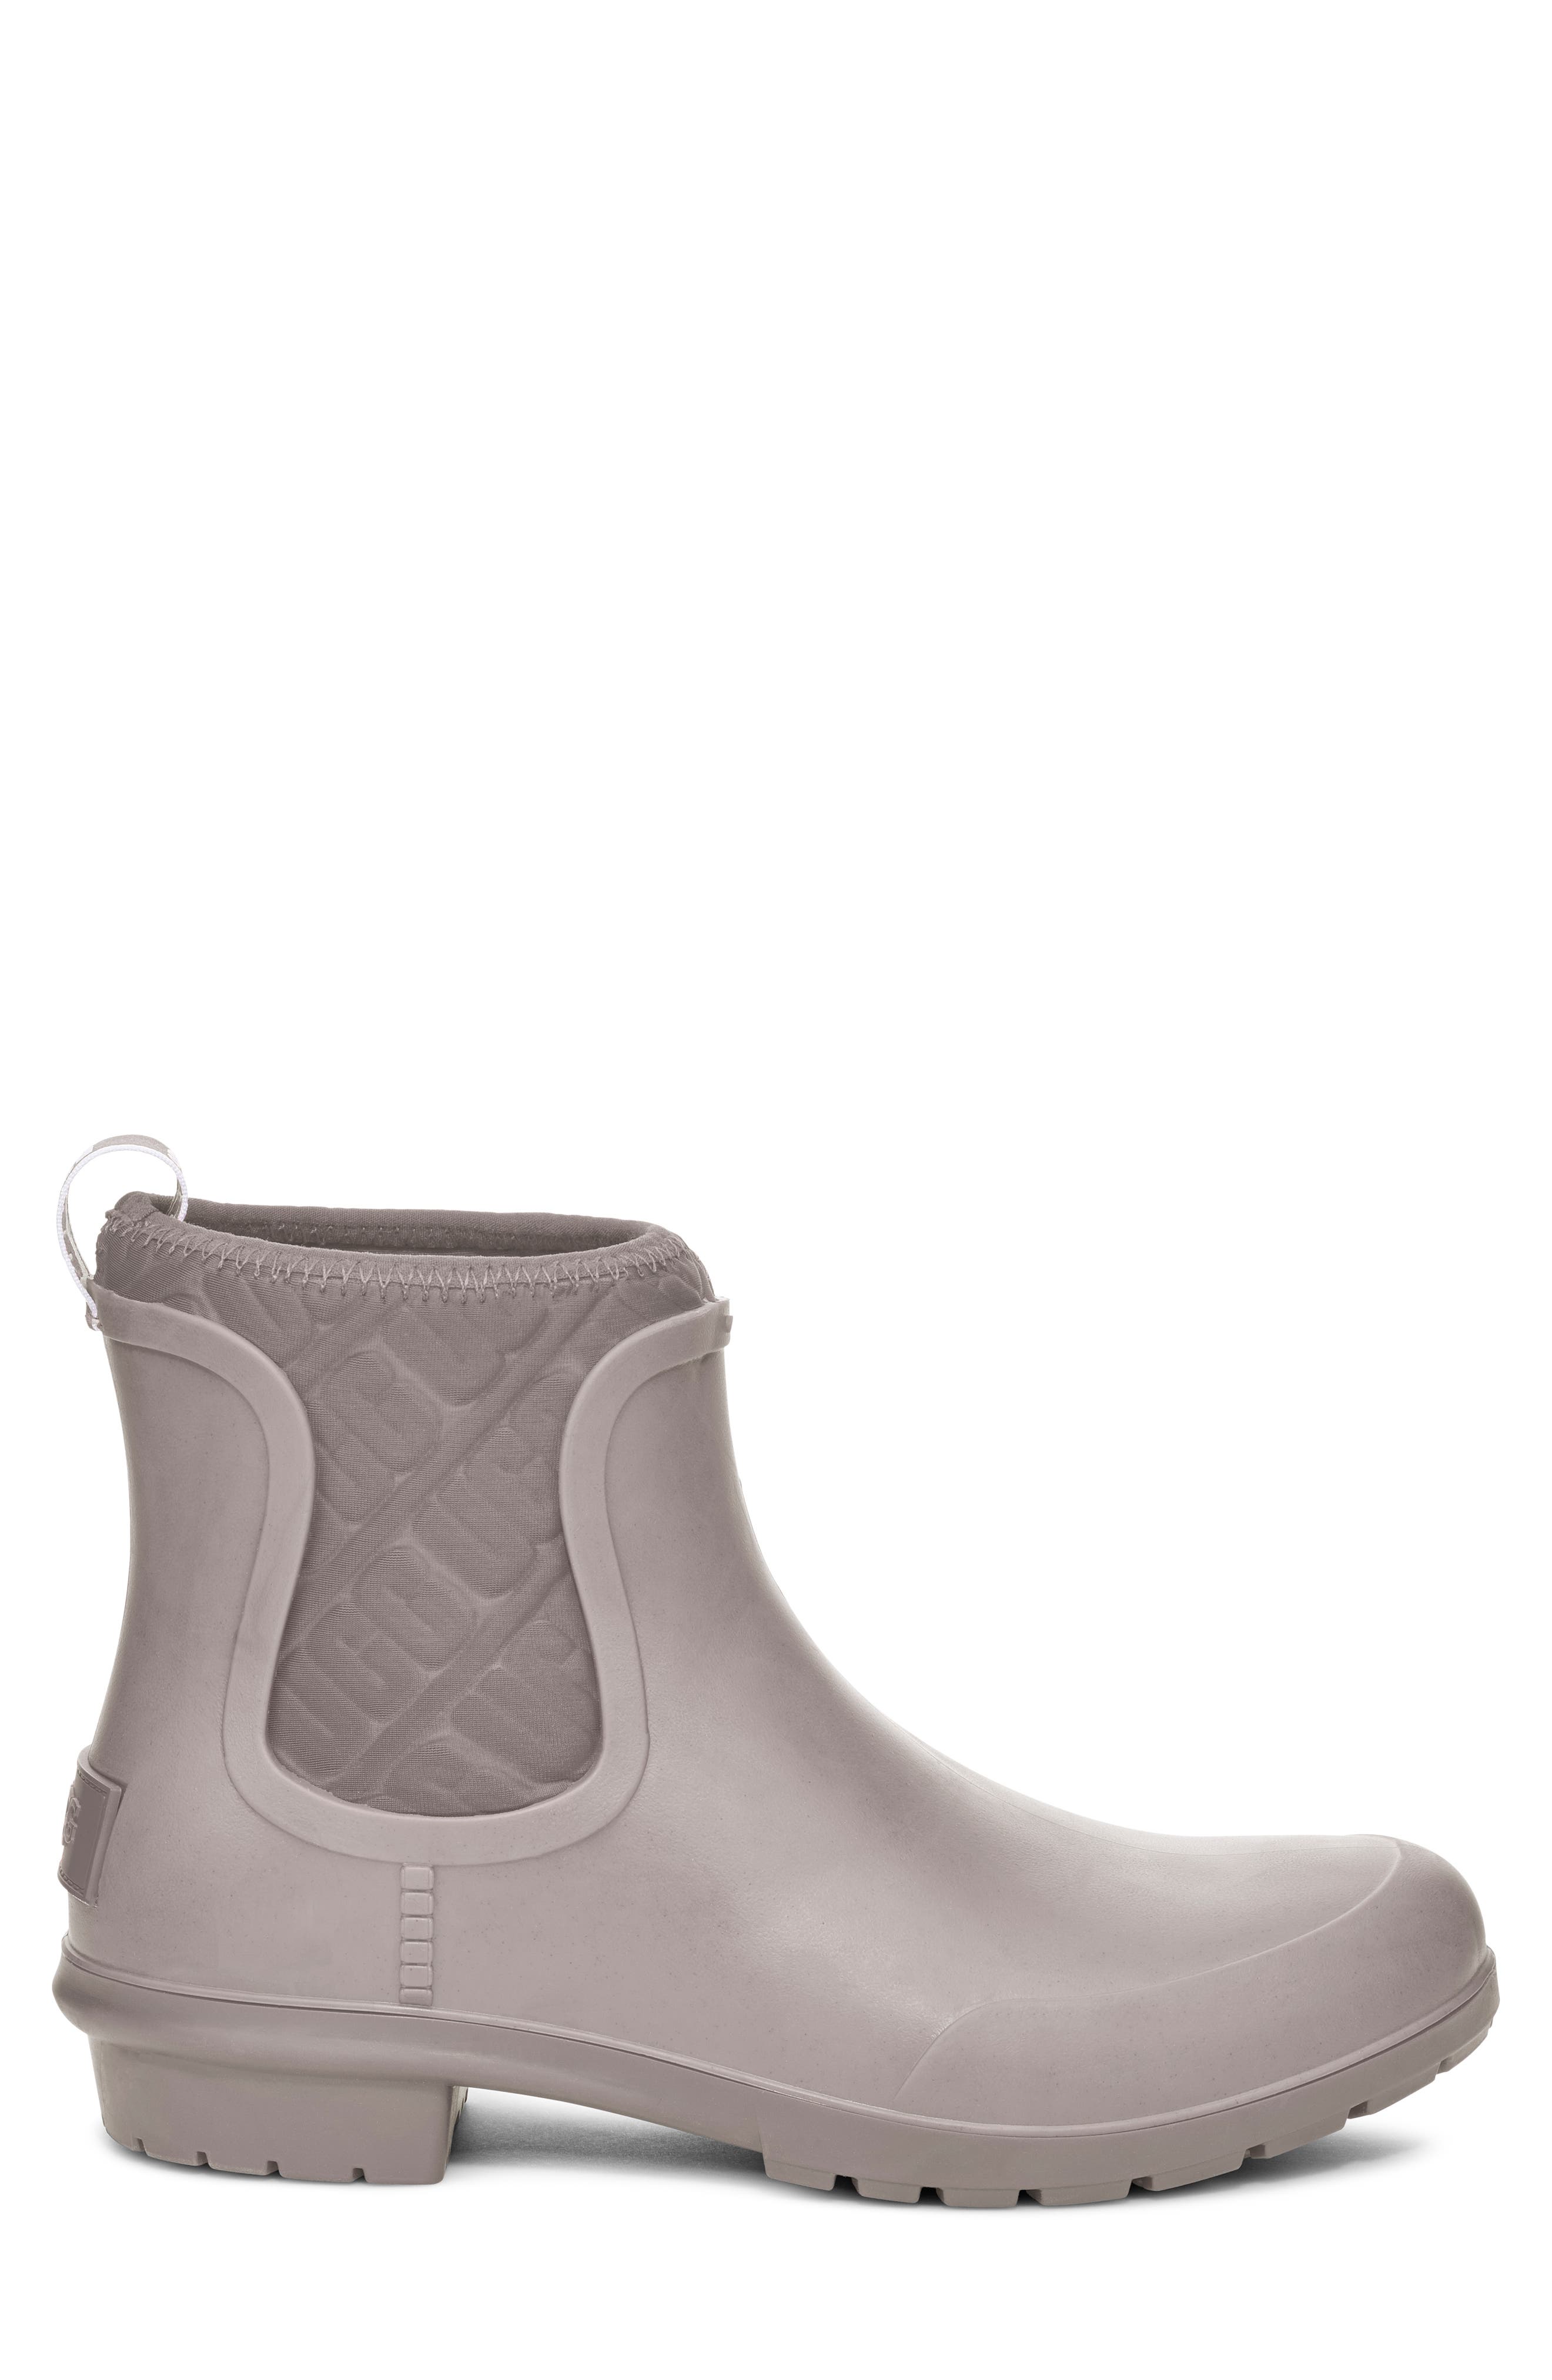 nordstrom ugg womens boots sale